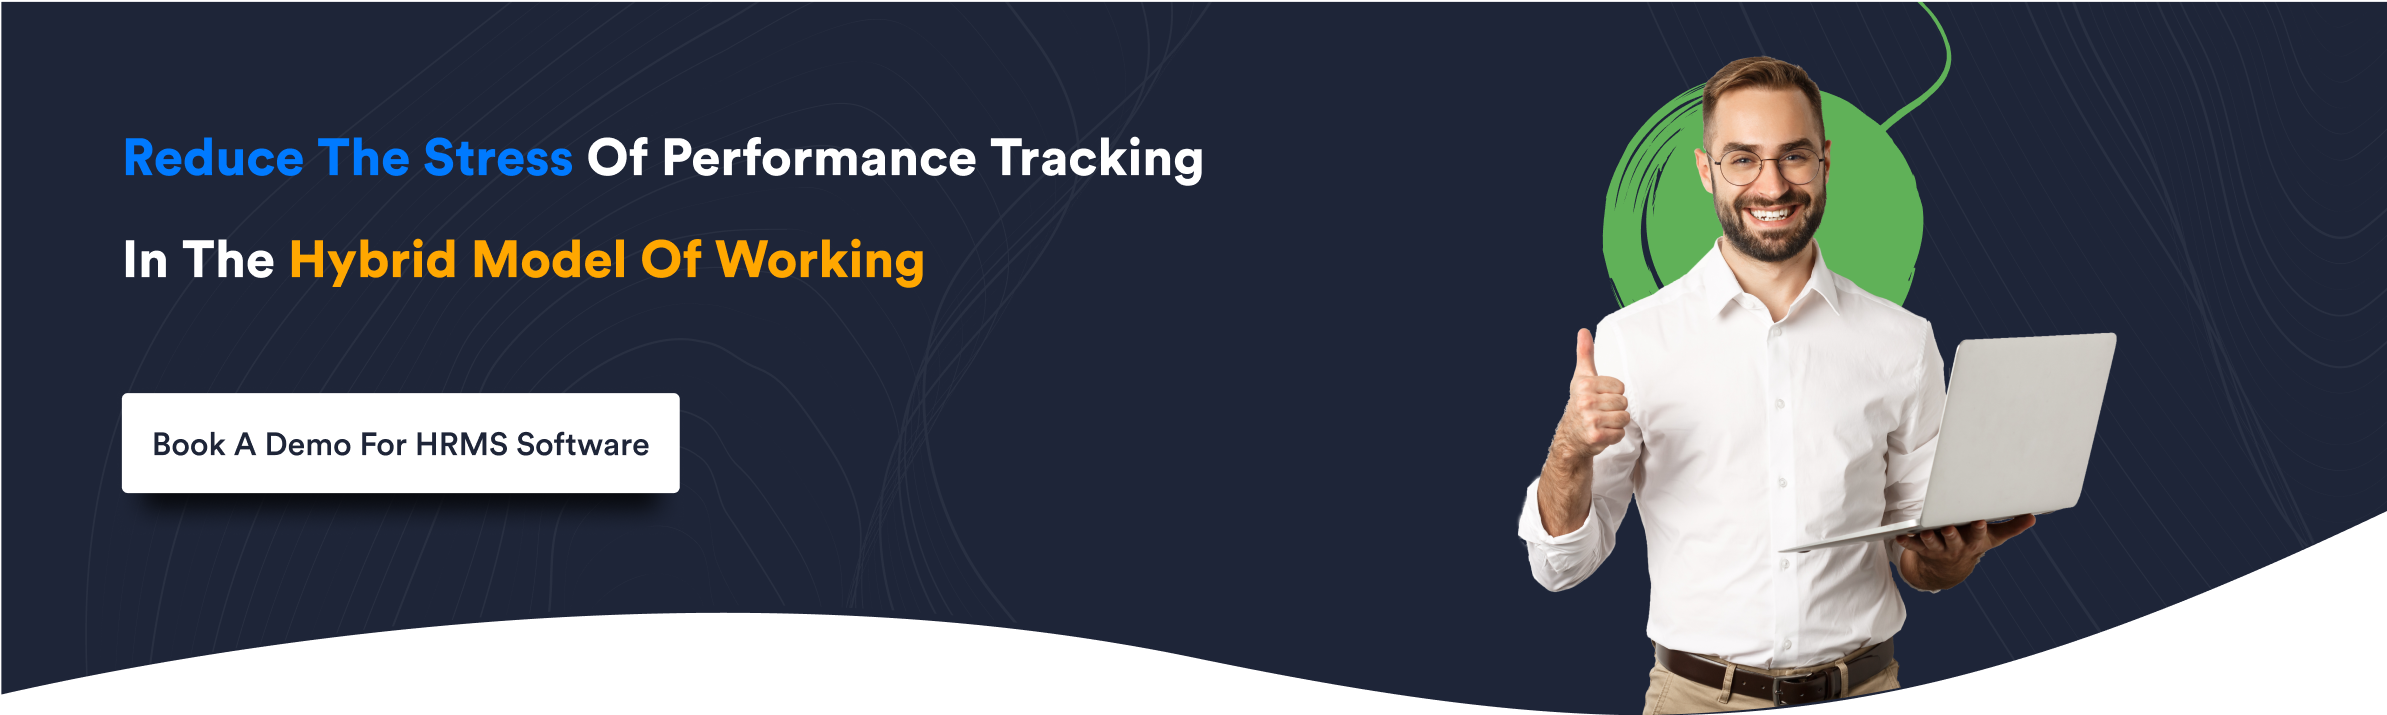 Reduce The Stress Of Performance Tracking